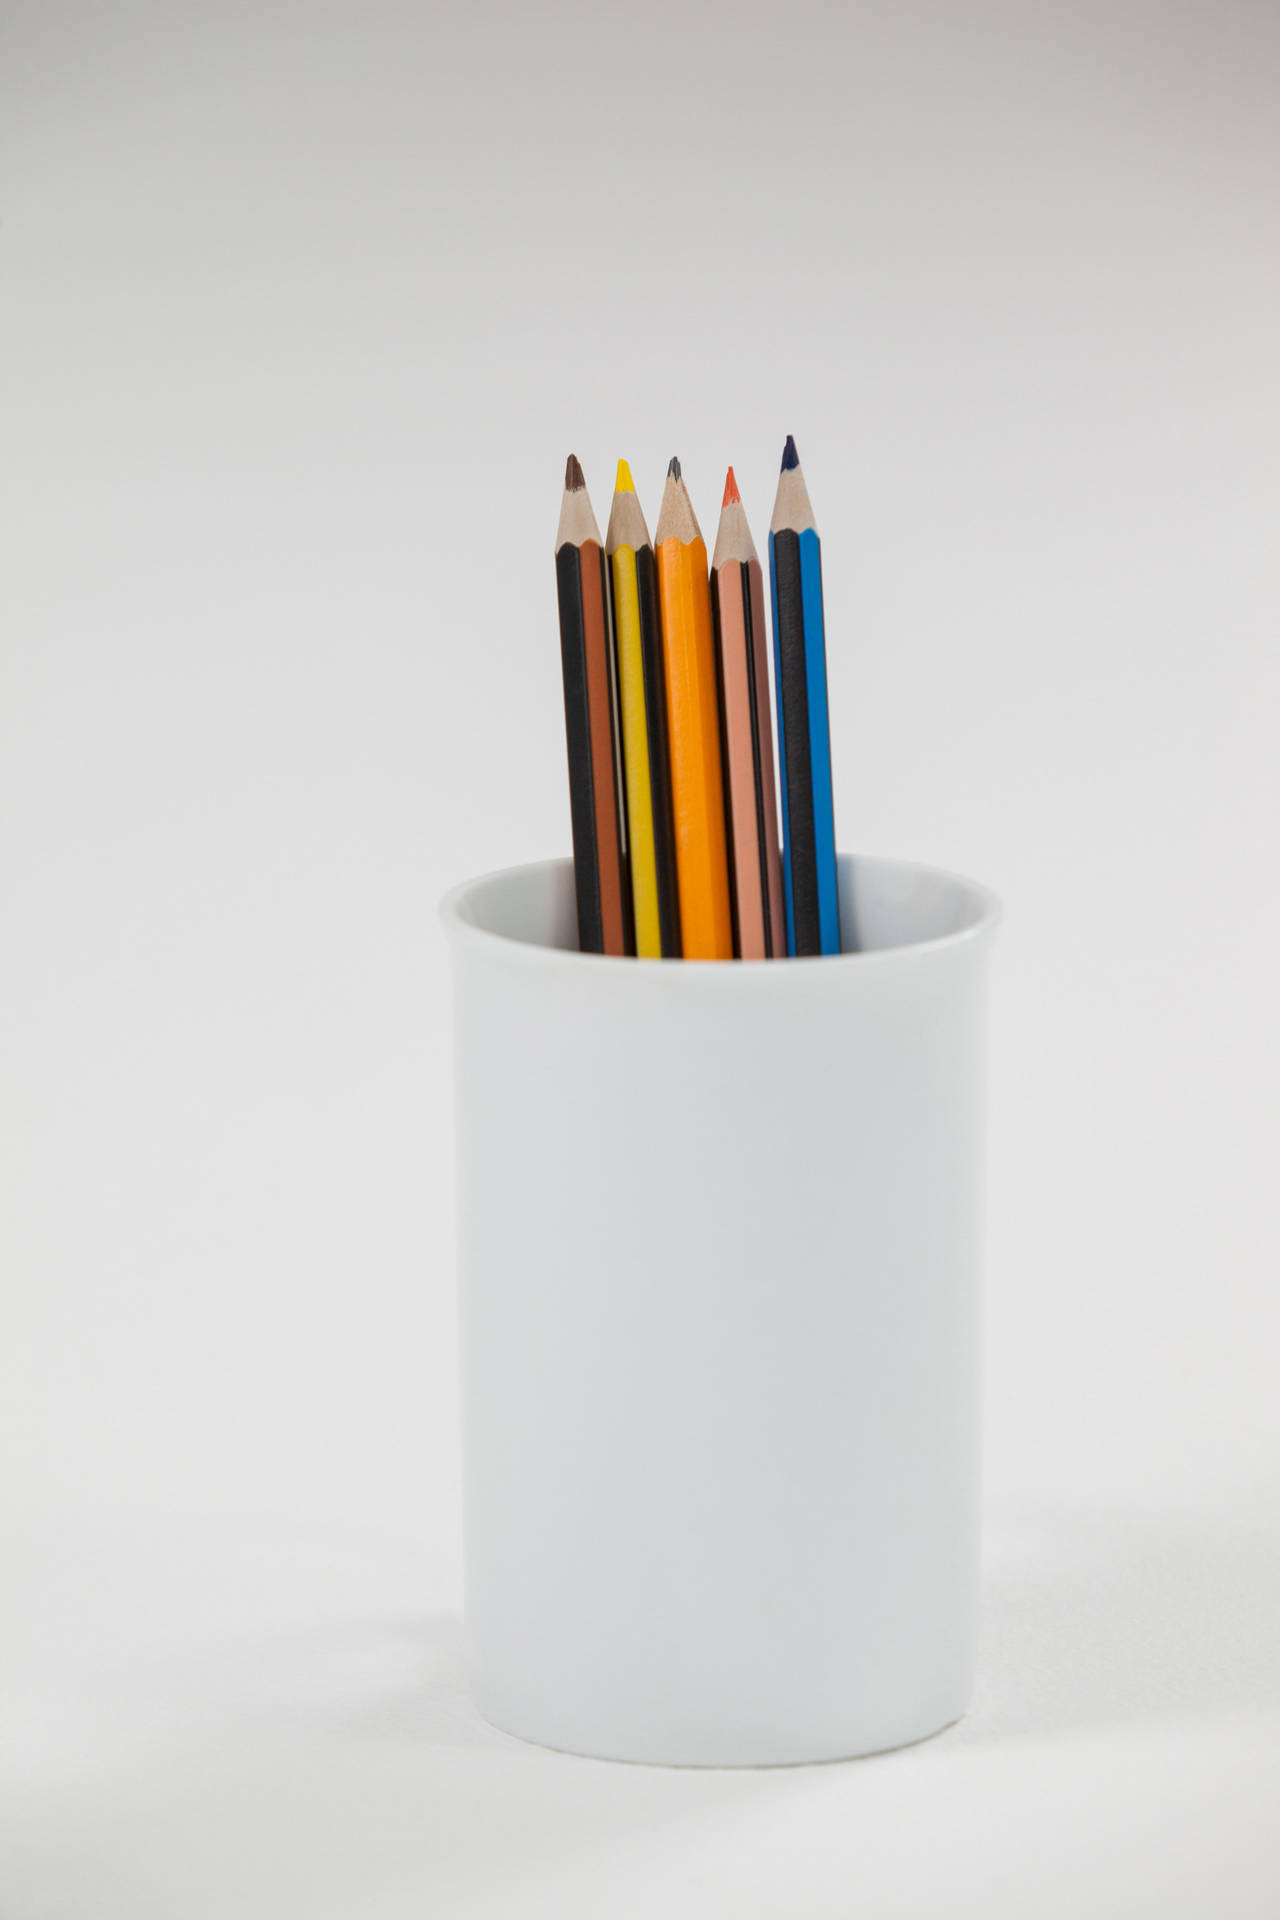 Cup Of Pencils For Art Study Background